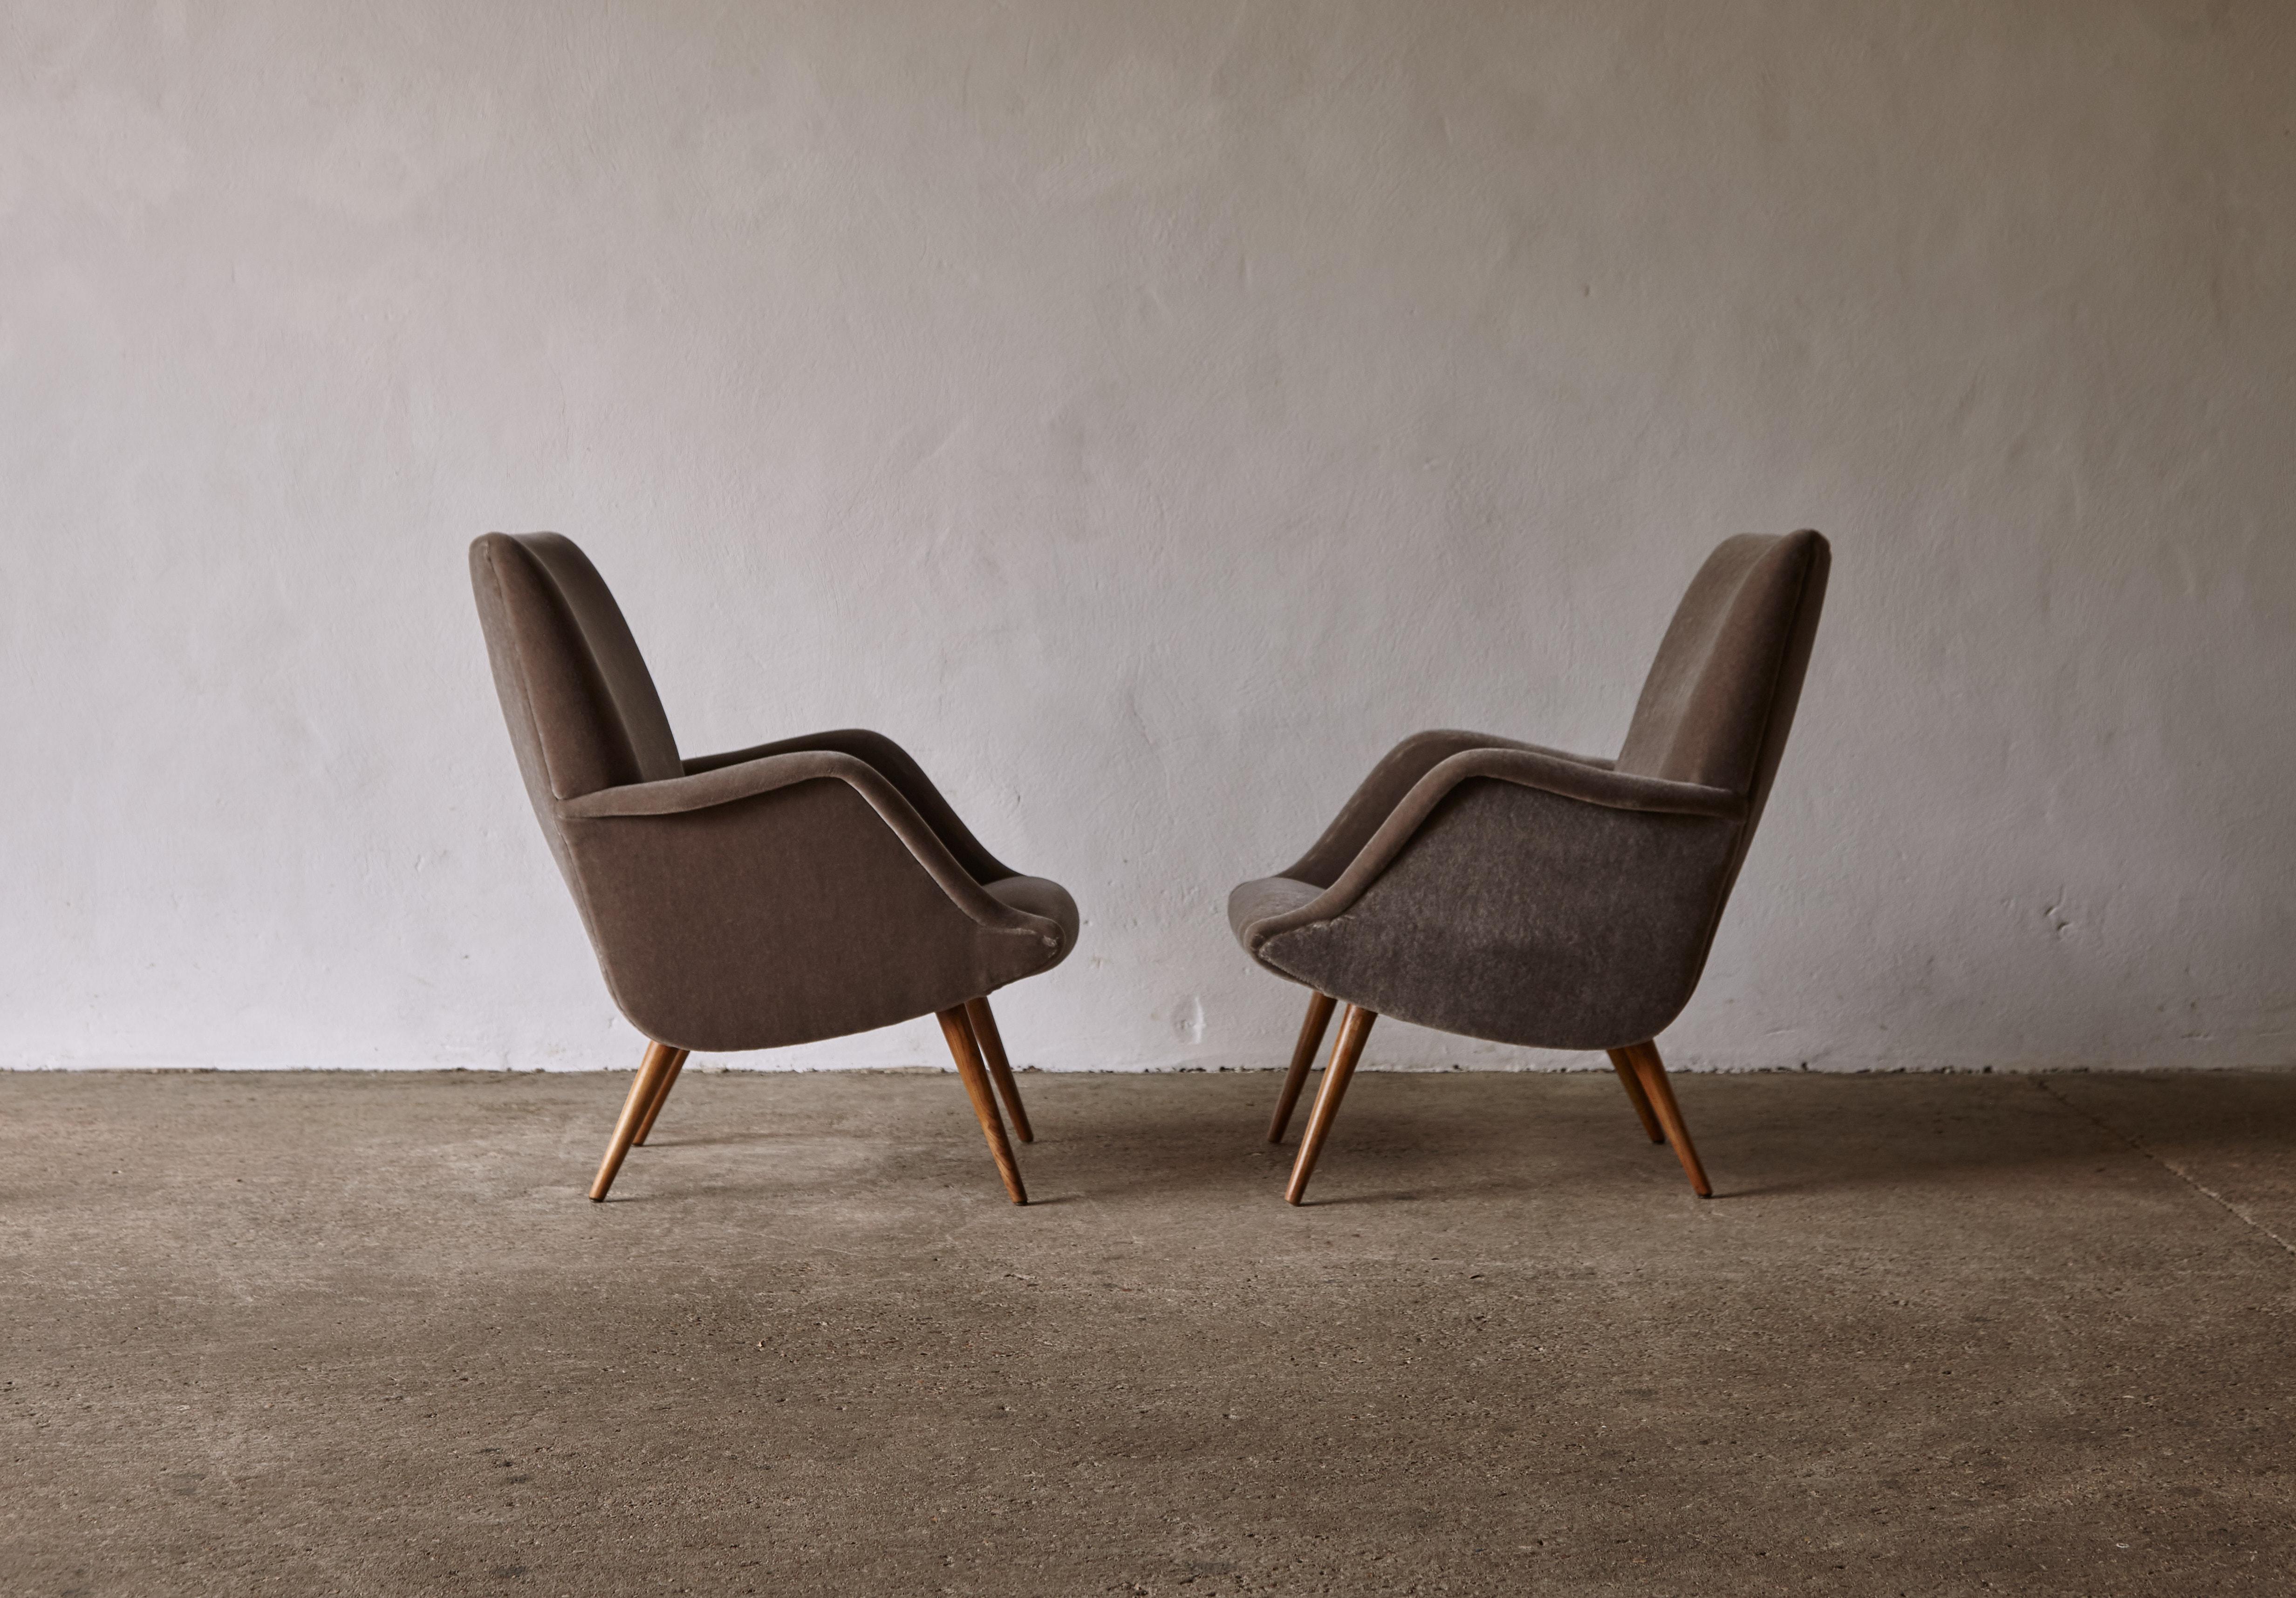 Carlo de Carli Model 806 Chairs, Produced by Cassina, Italy, 1950s For Sale 2